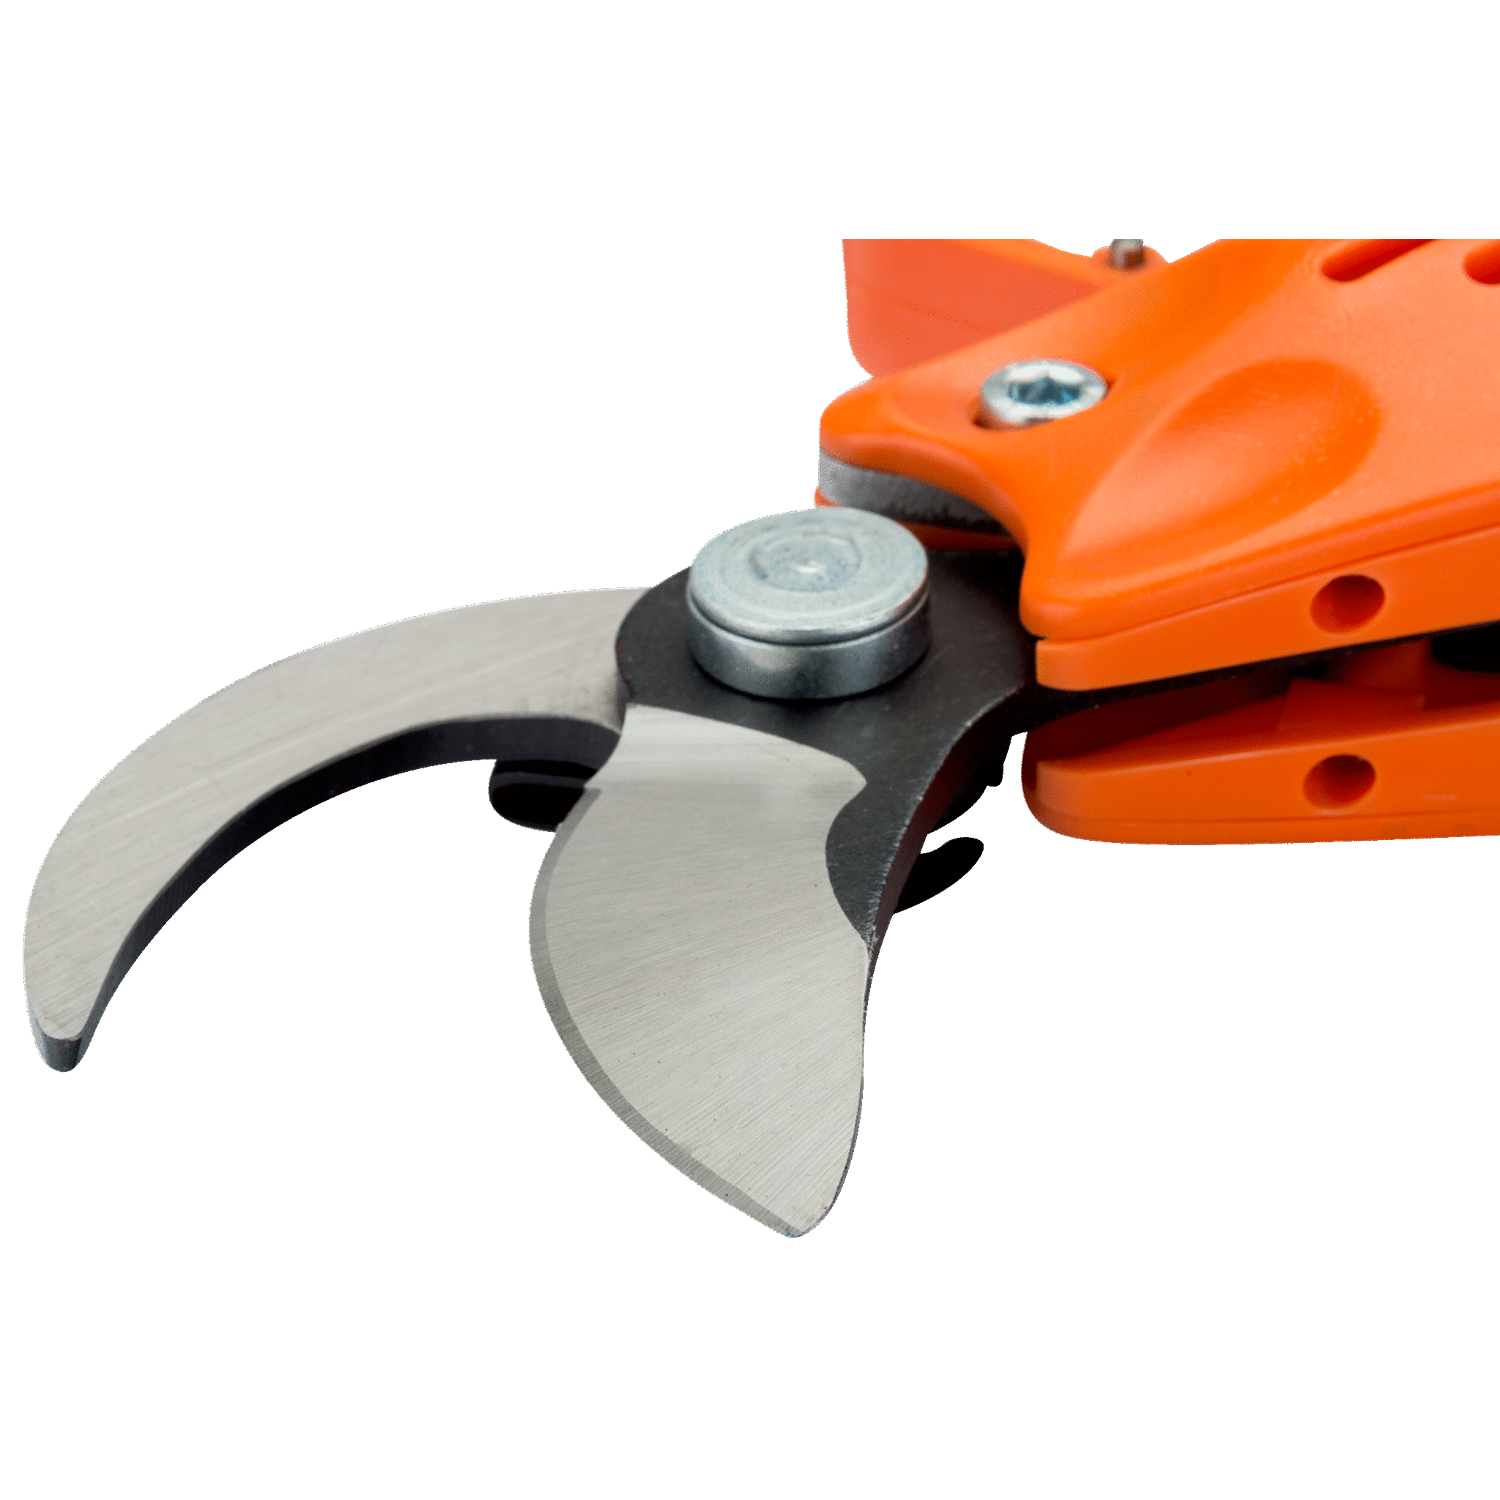 BAHCO 9210 Professional Air Secateurs with Single Cutting Blade (BAHCO Tools) - Premium 1/4" Air Secateur from BAHCO - Shop now at Yew Aik.